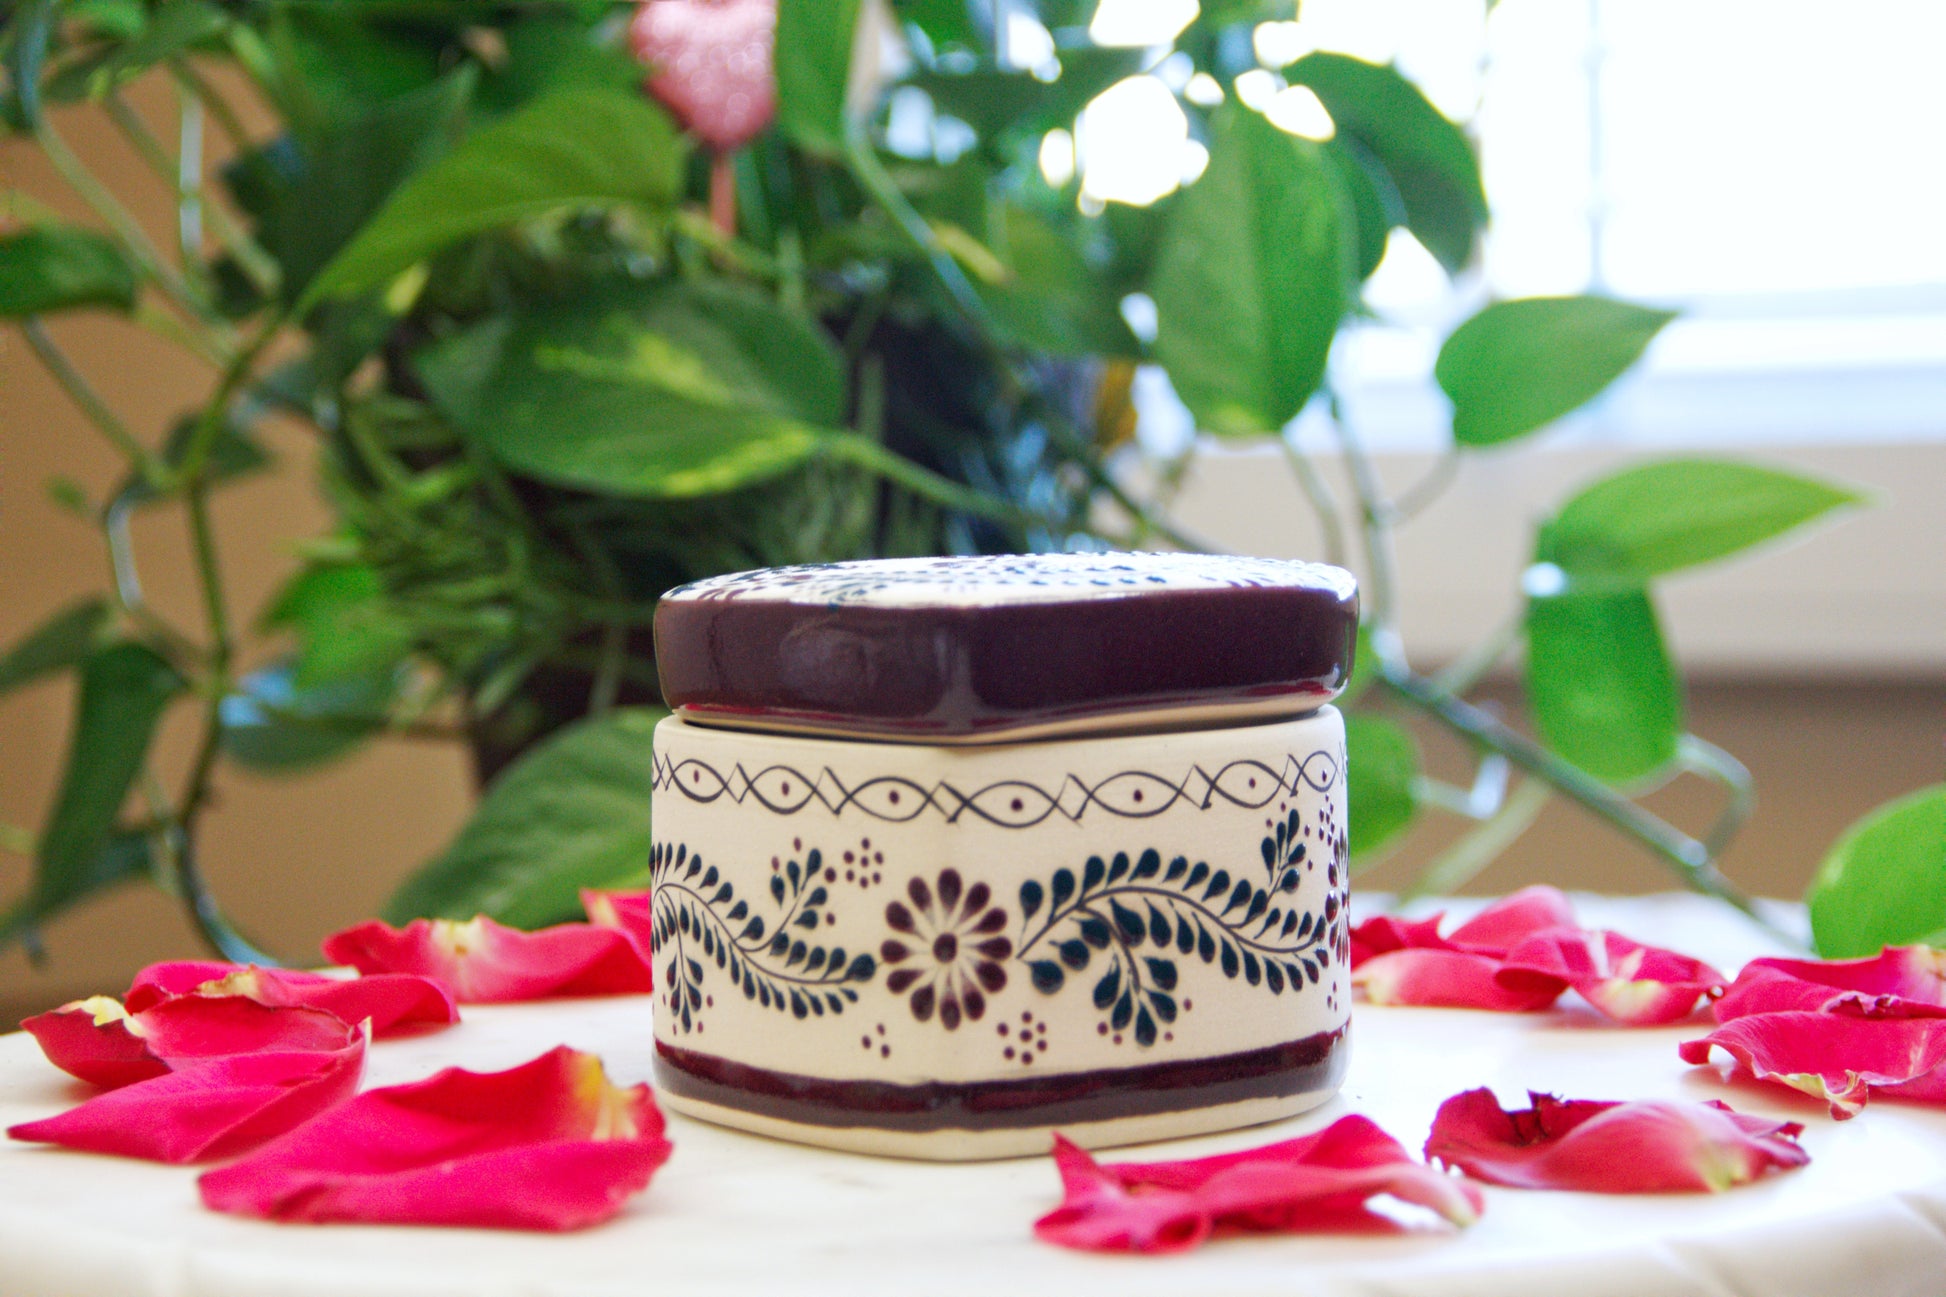 side view of an Artisanal candle in a beautiful heart shaped talavera. Handmade brown floral design with a closed lid. Handcrafted by Artisan in Mexico City. 100% All Natural Soy Candle. Reuse the talavera as home decor or storage.